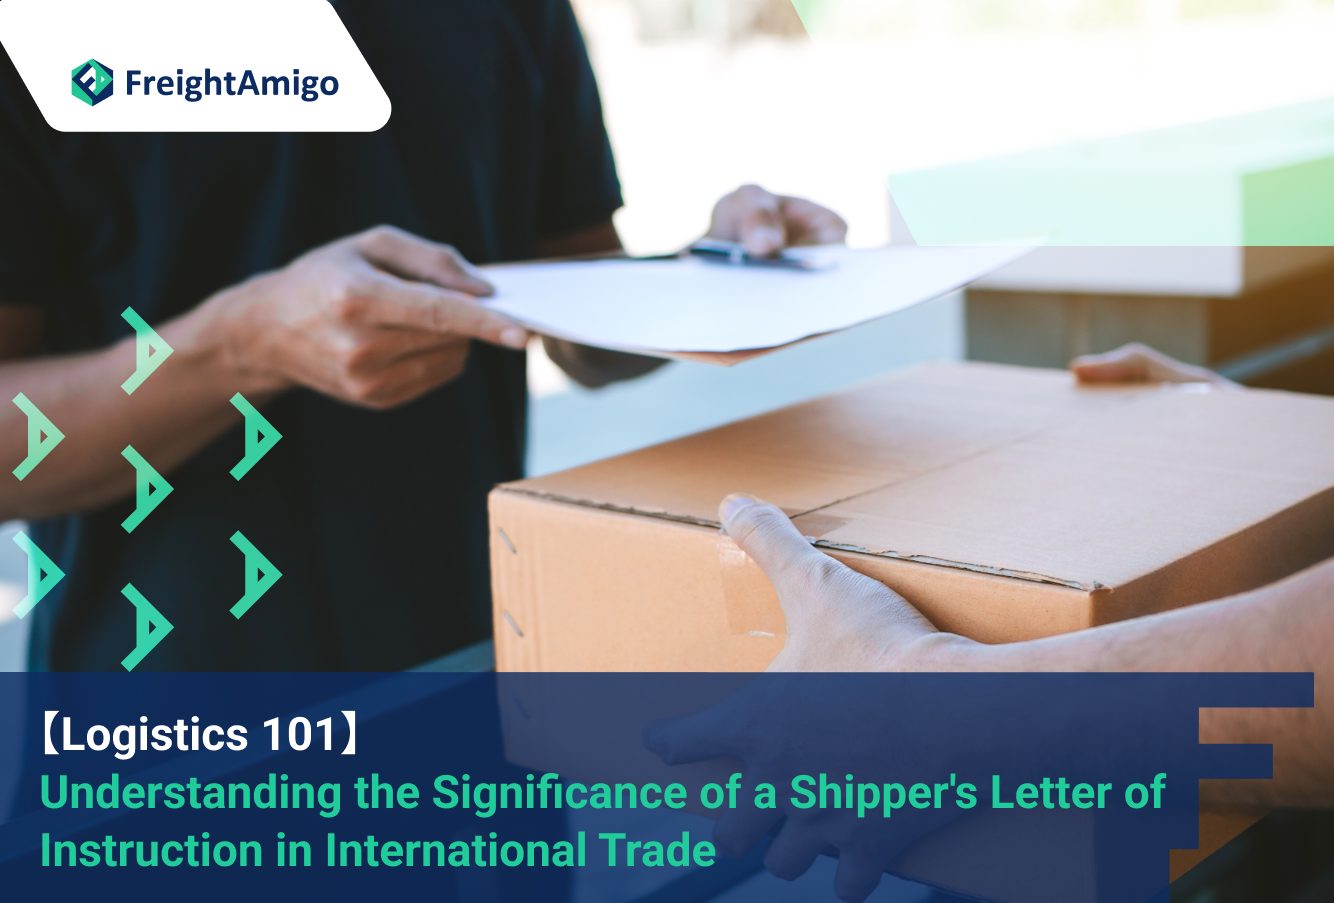 【Logistics 101】 Understanding the Significance of a Shipper’s Letter of Instruction in International Trade